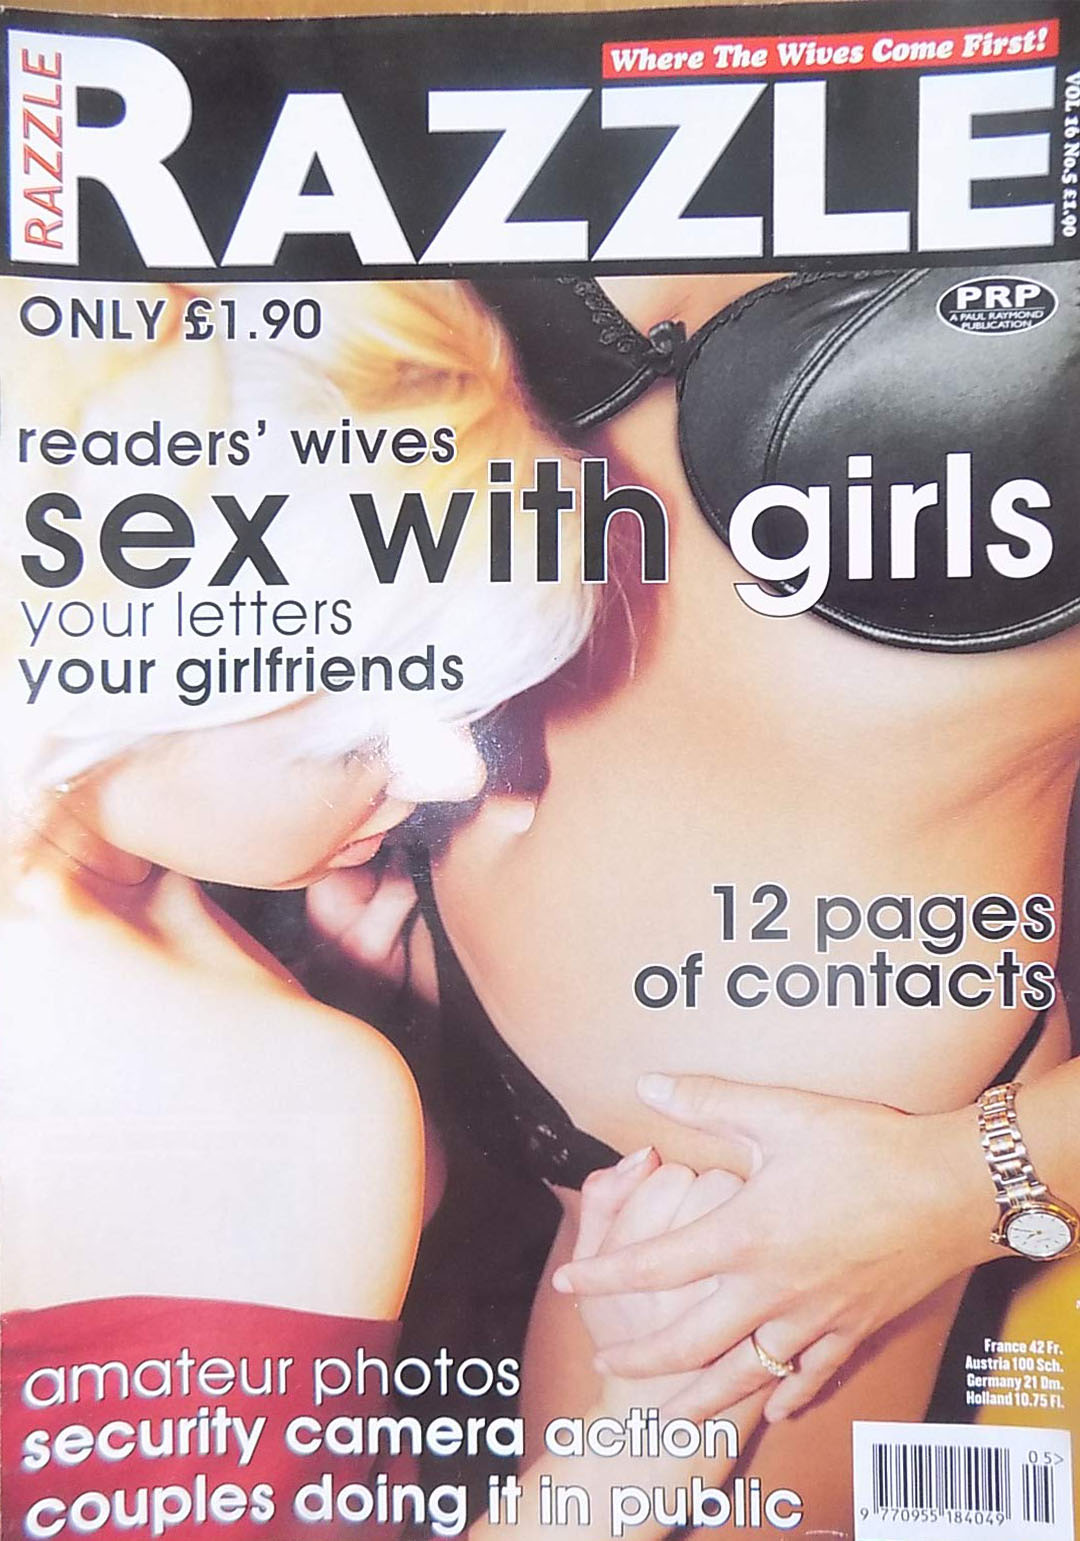 Razzle Vol. 16 # 5 magazine back issue Razzle magizine back copy Razzle Vol. 16 # 5 British UK pornographic Magazine Back Issue Published by Paul Raymond Publications and Founded in 1983. Where The Wives Come First!.